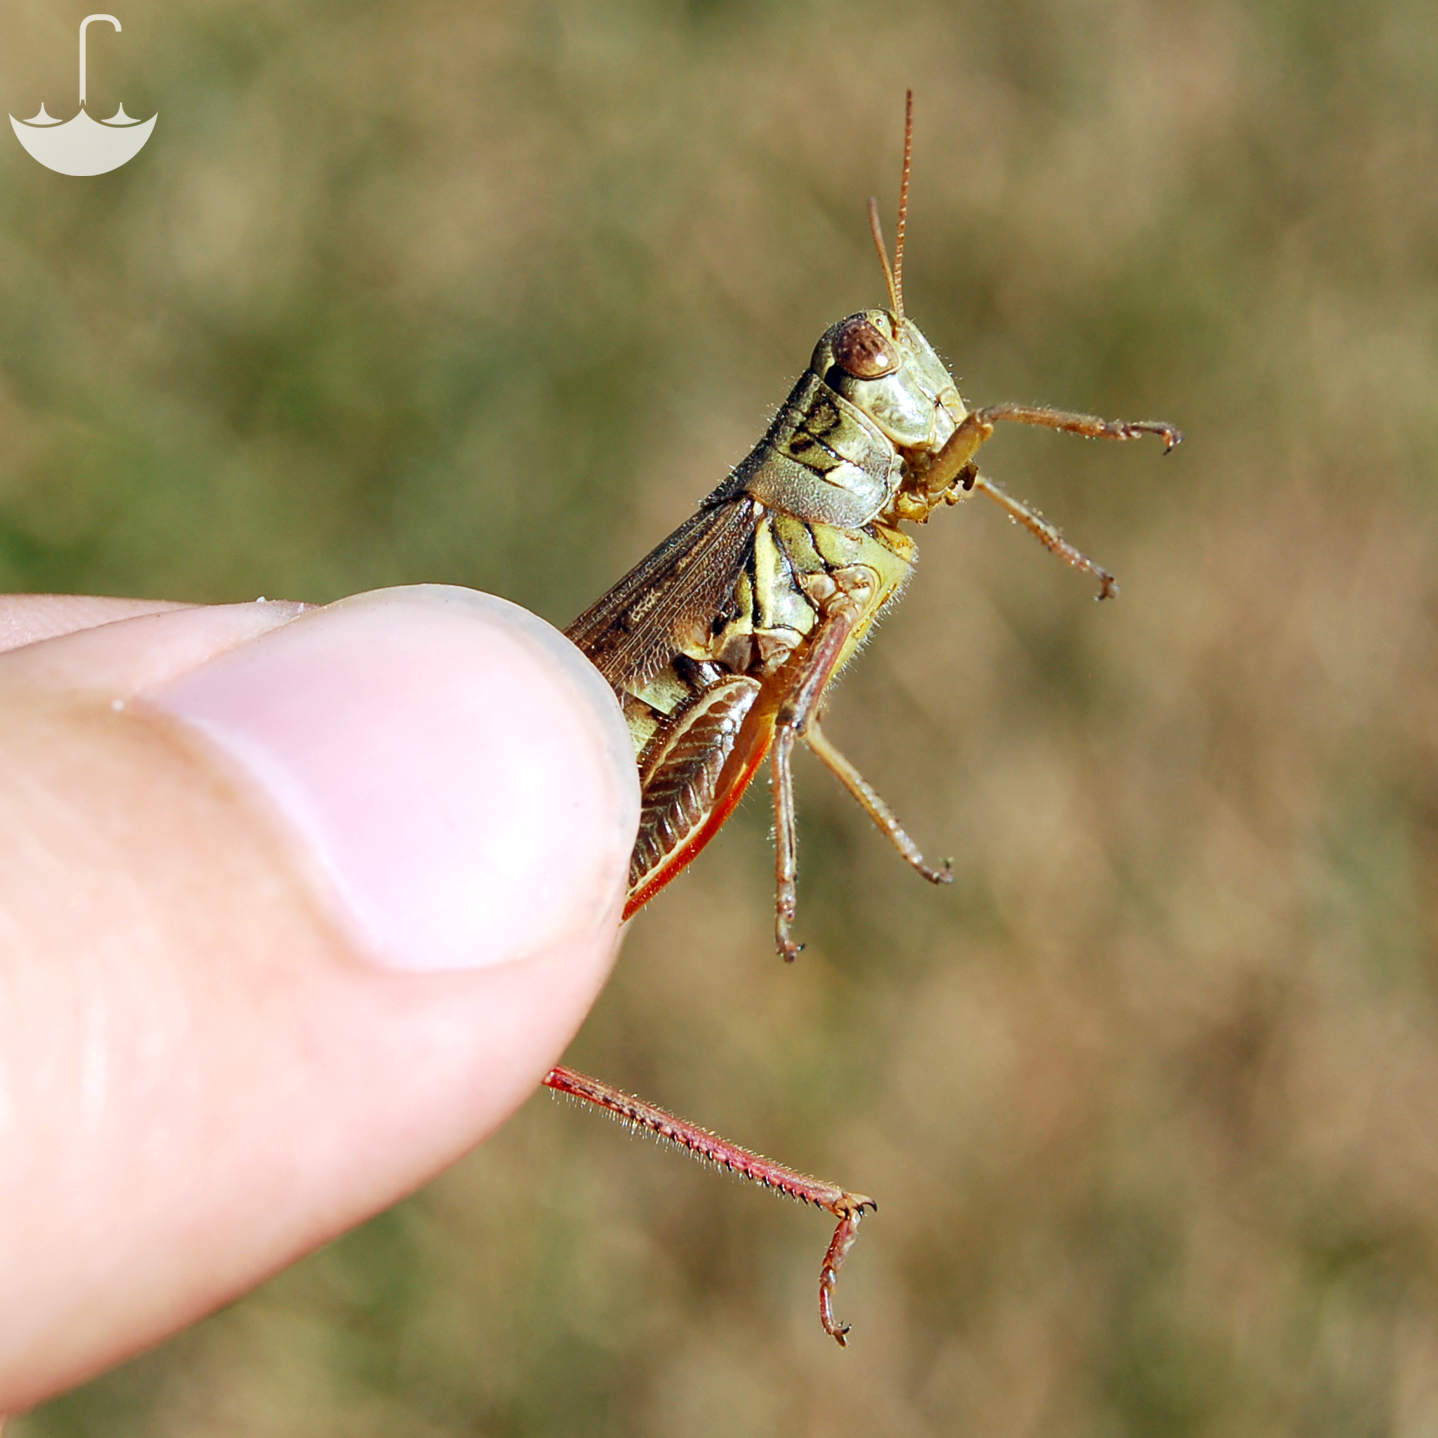 the insect is perched on the finger of someone